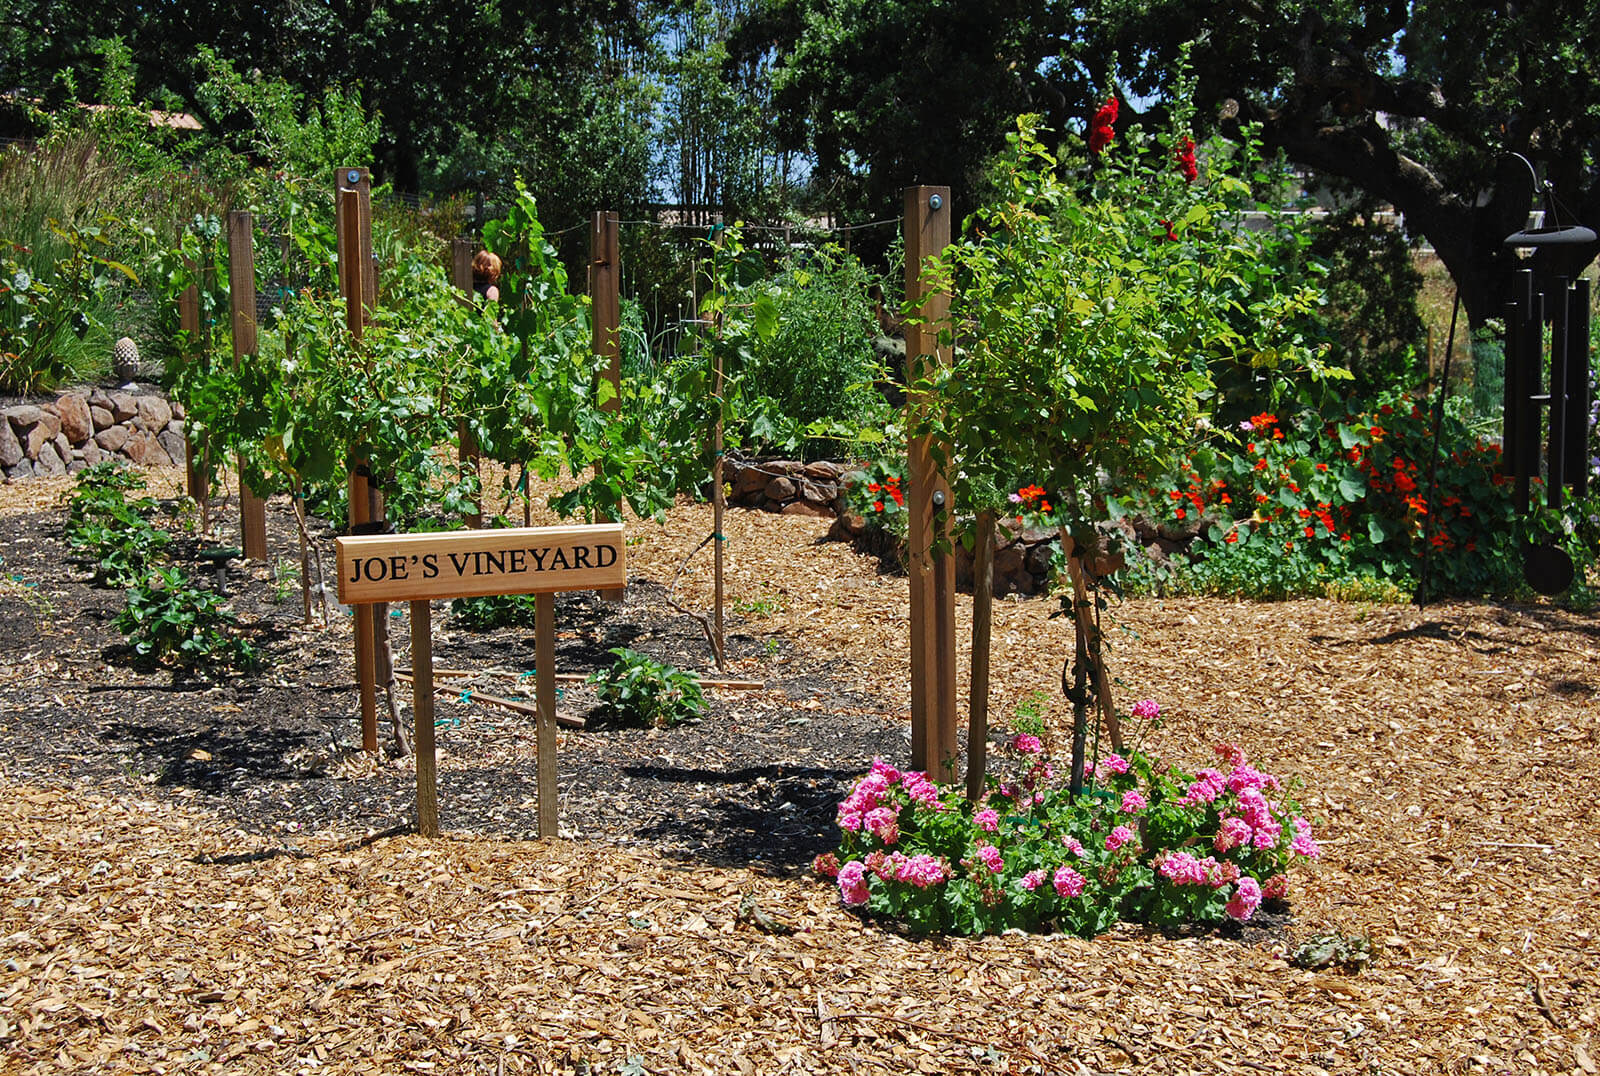 Joe's Vinyard - wood mulch covered garden with grapevine trellis and flowering areas in back